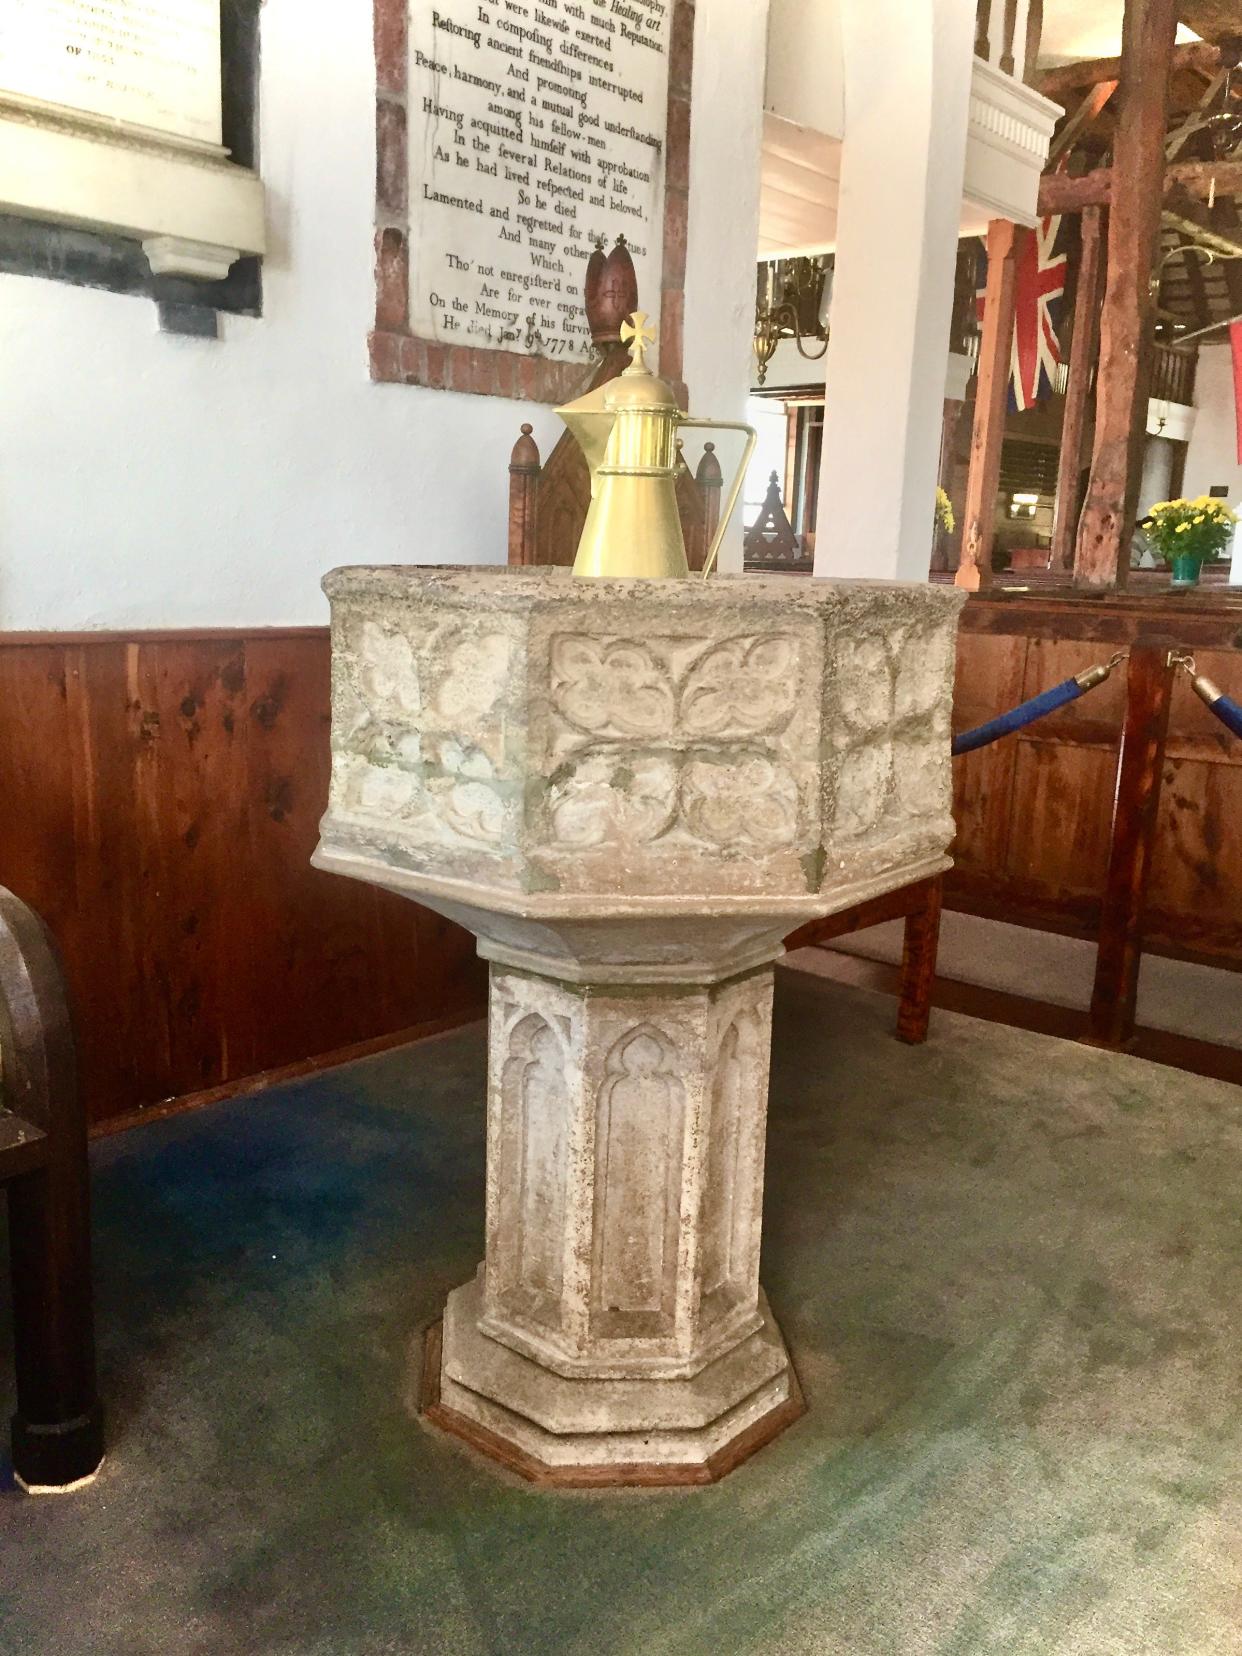 At more than 500 years old, the font at St. Peter’s Church is the island’s oldest man-made treasure.